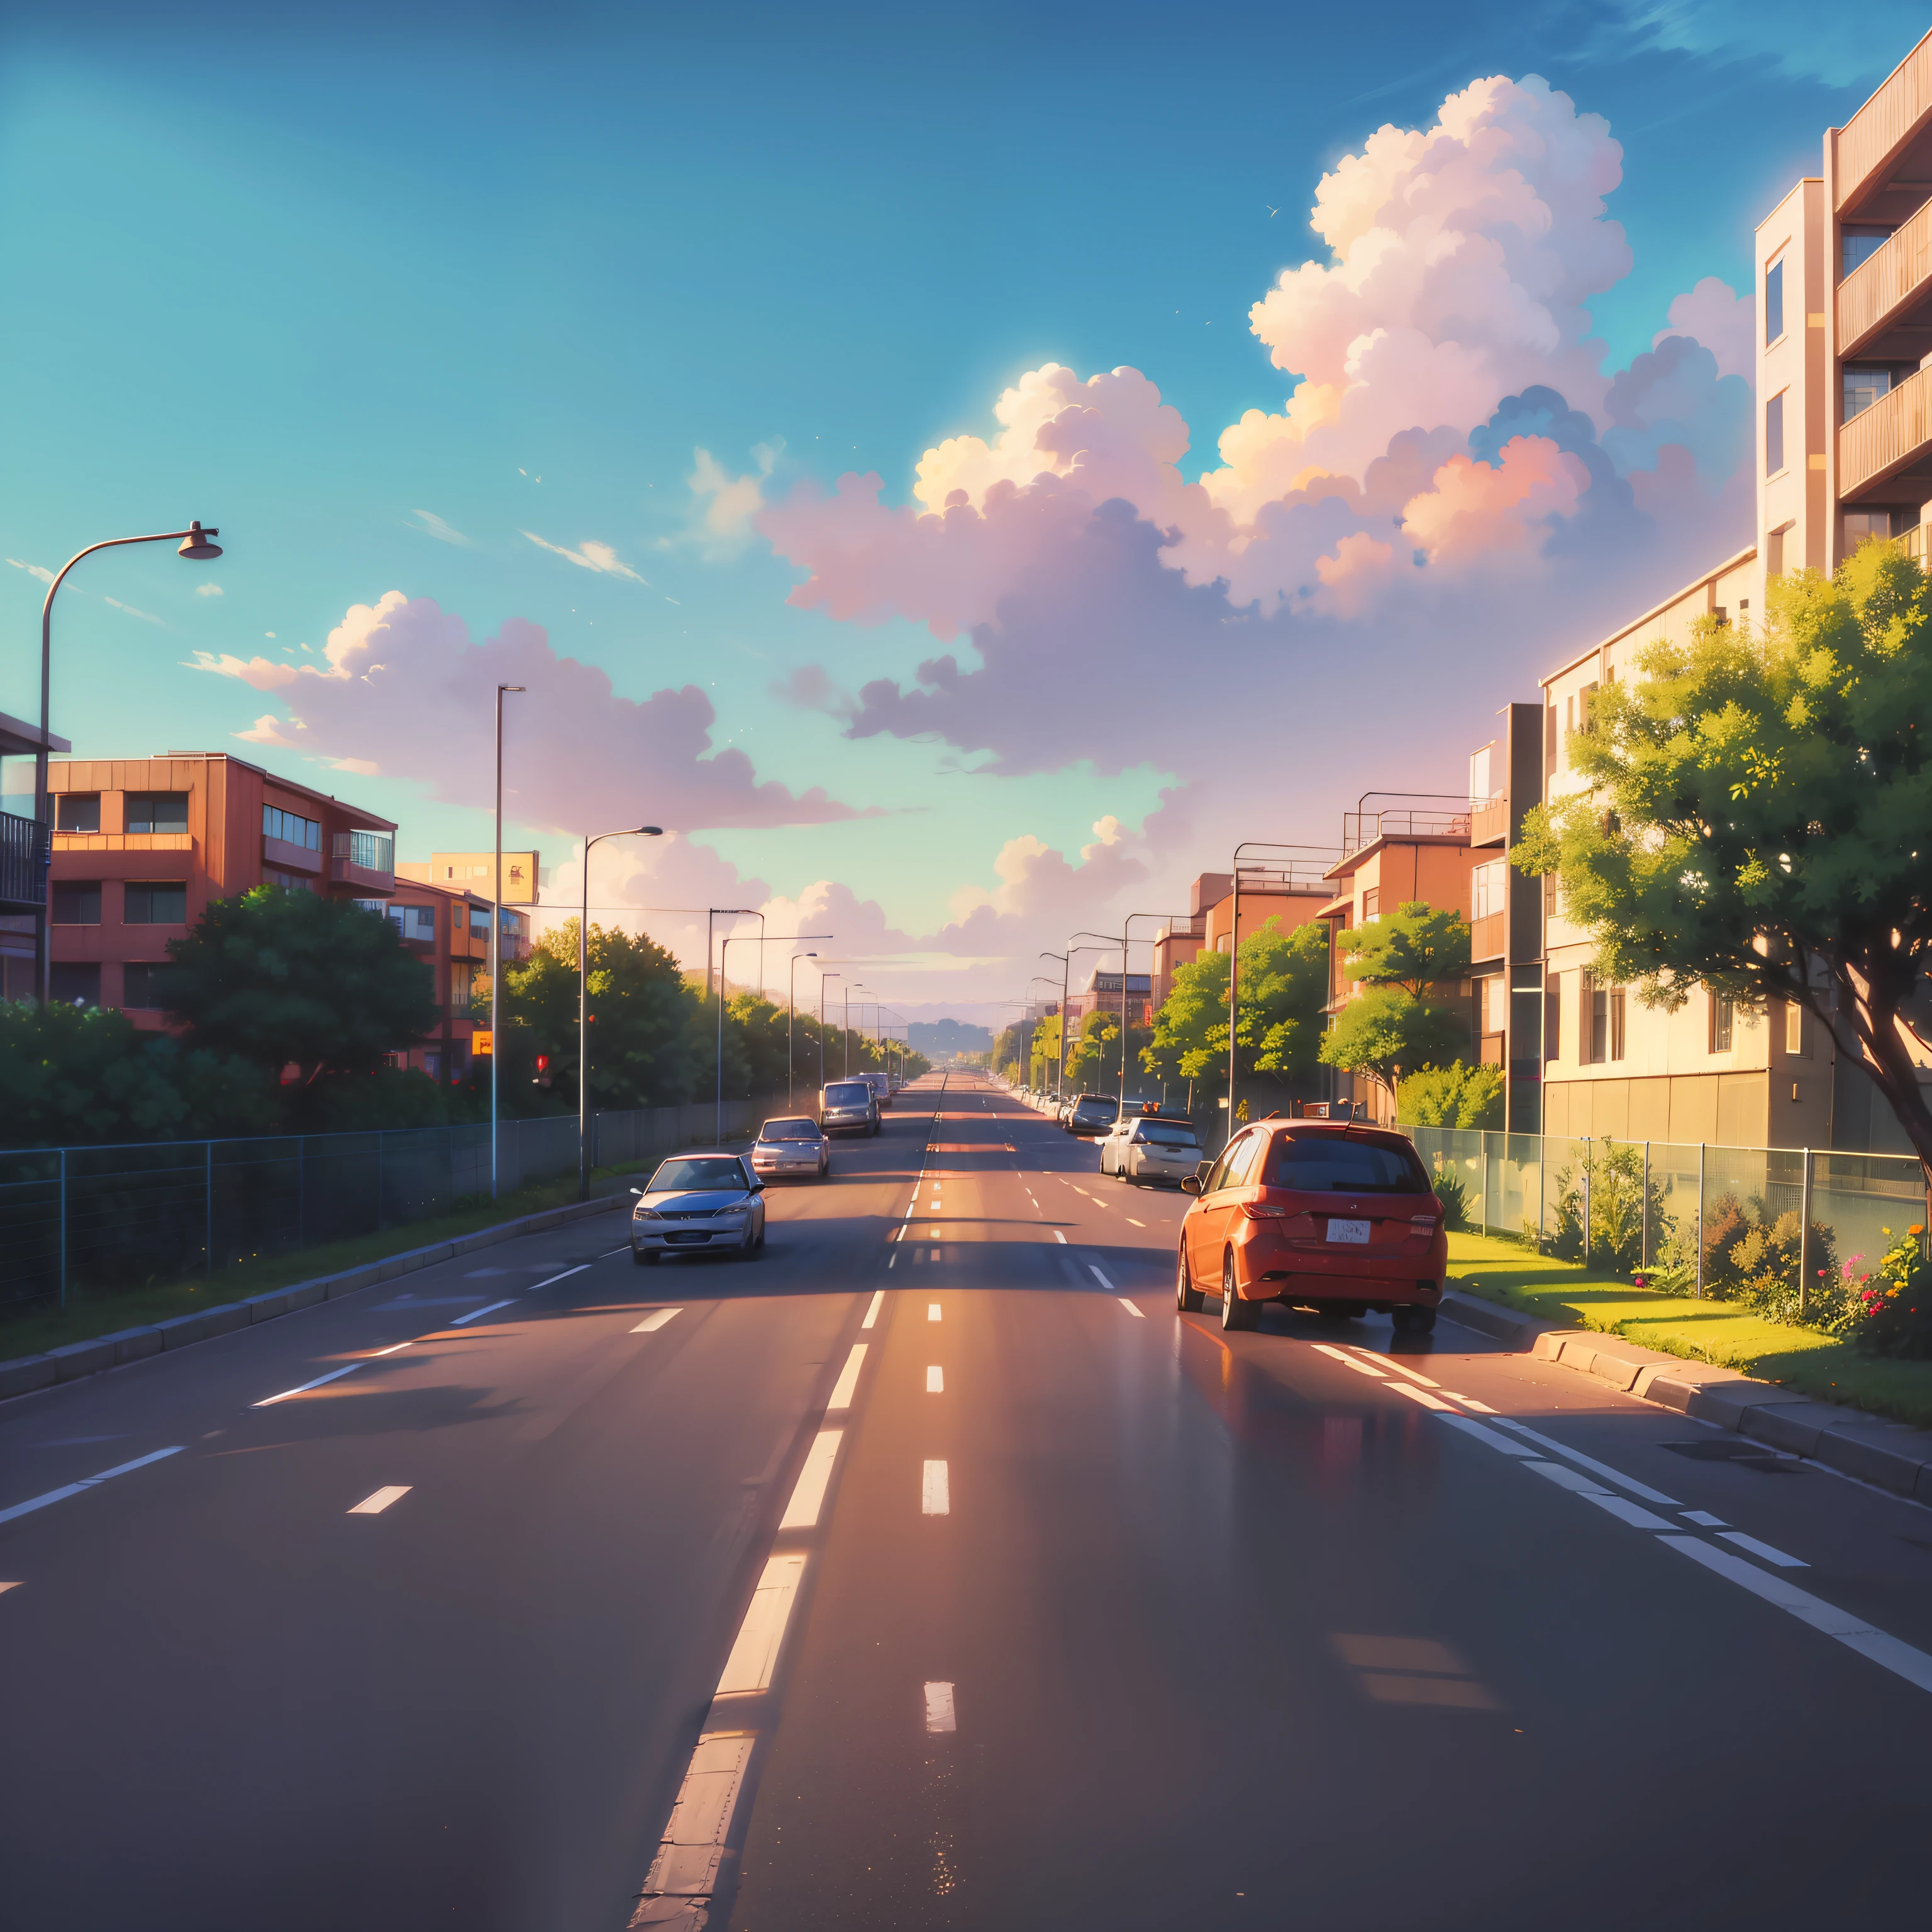 Arte estilo de anime, ((artistic work)), anime diner, background scene, a highway with pontillon, cenario urbano, highway outside the city, city in the background with large buildings, beautiful scenery in the late afternoon, urban highway, background scene para anime, (((Arte estilo de anime))), ((angle of view height from the ground))